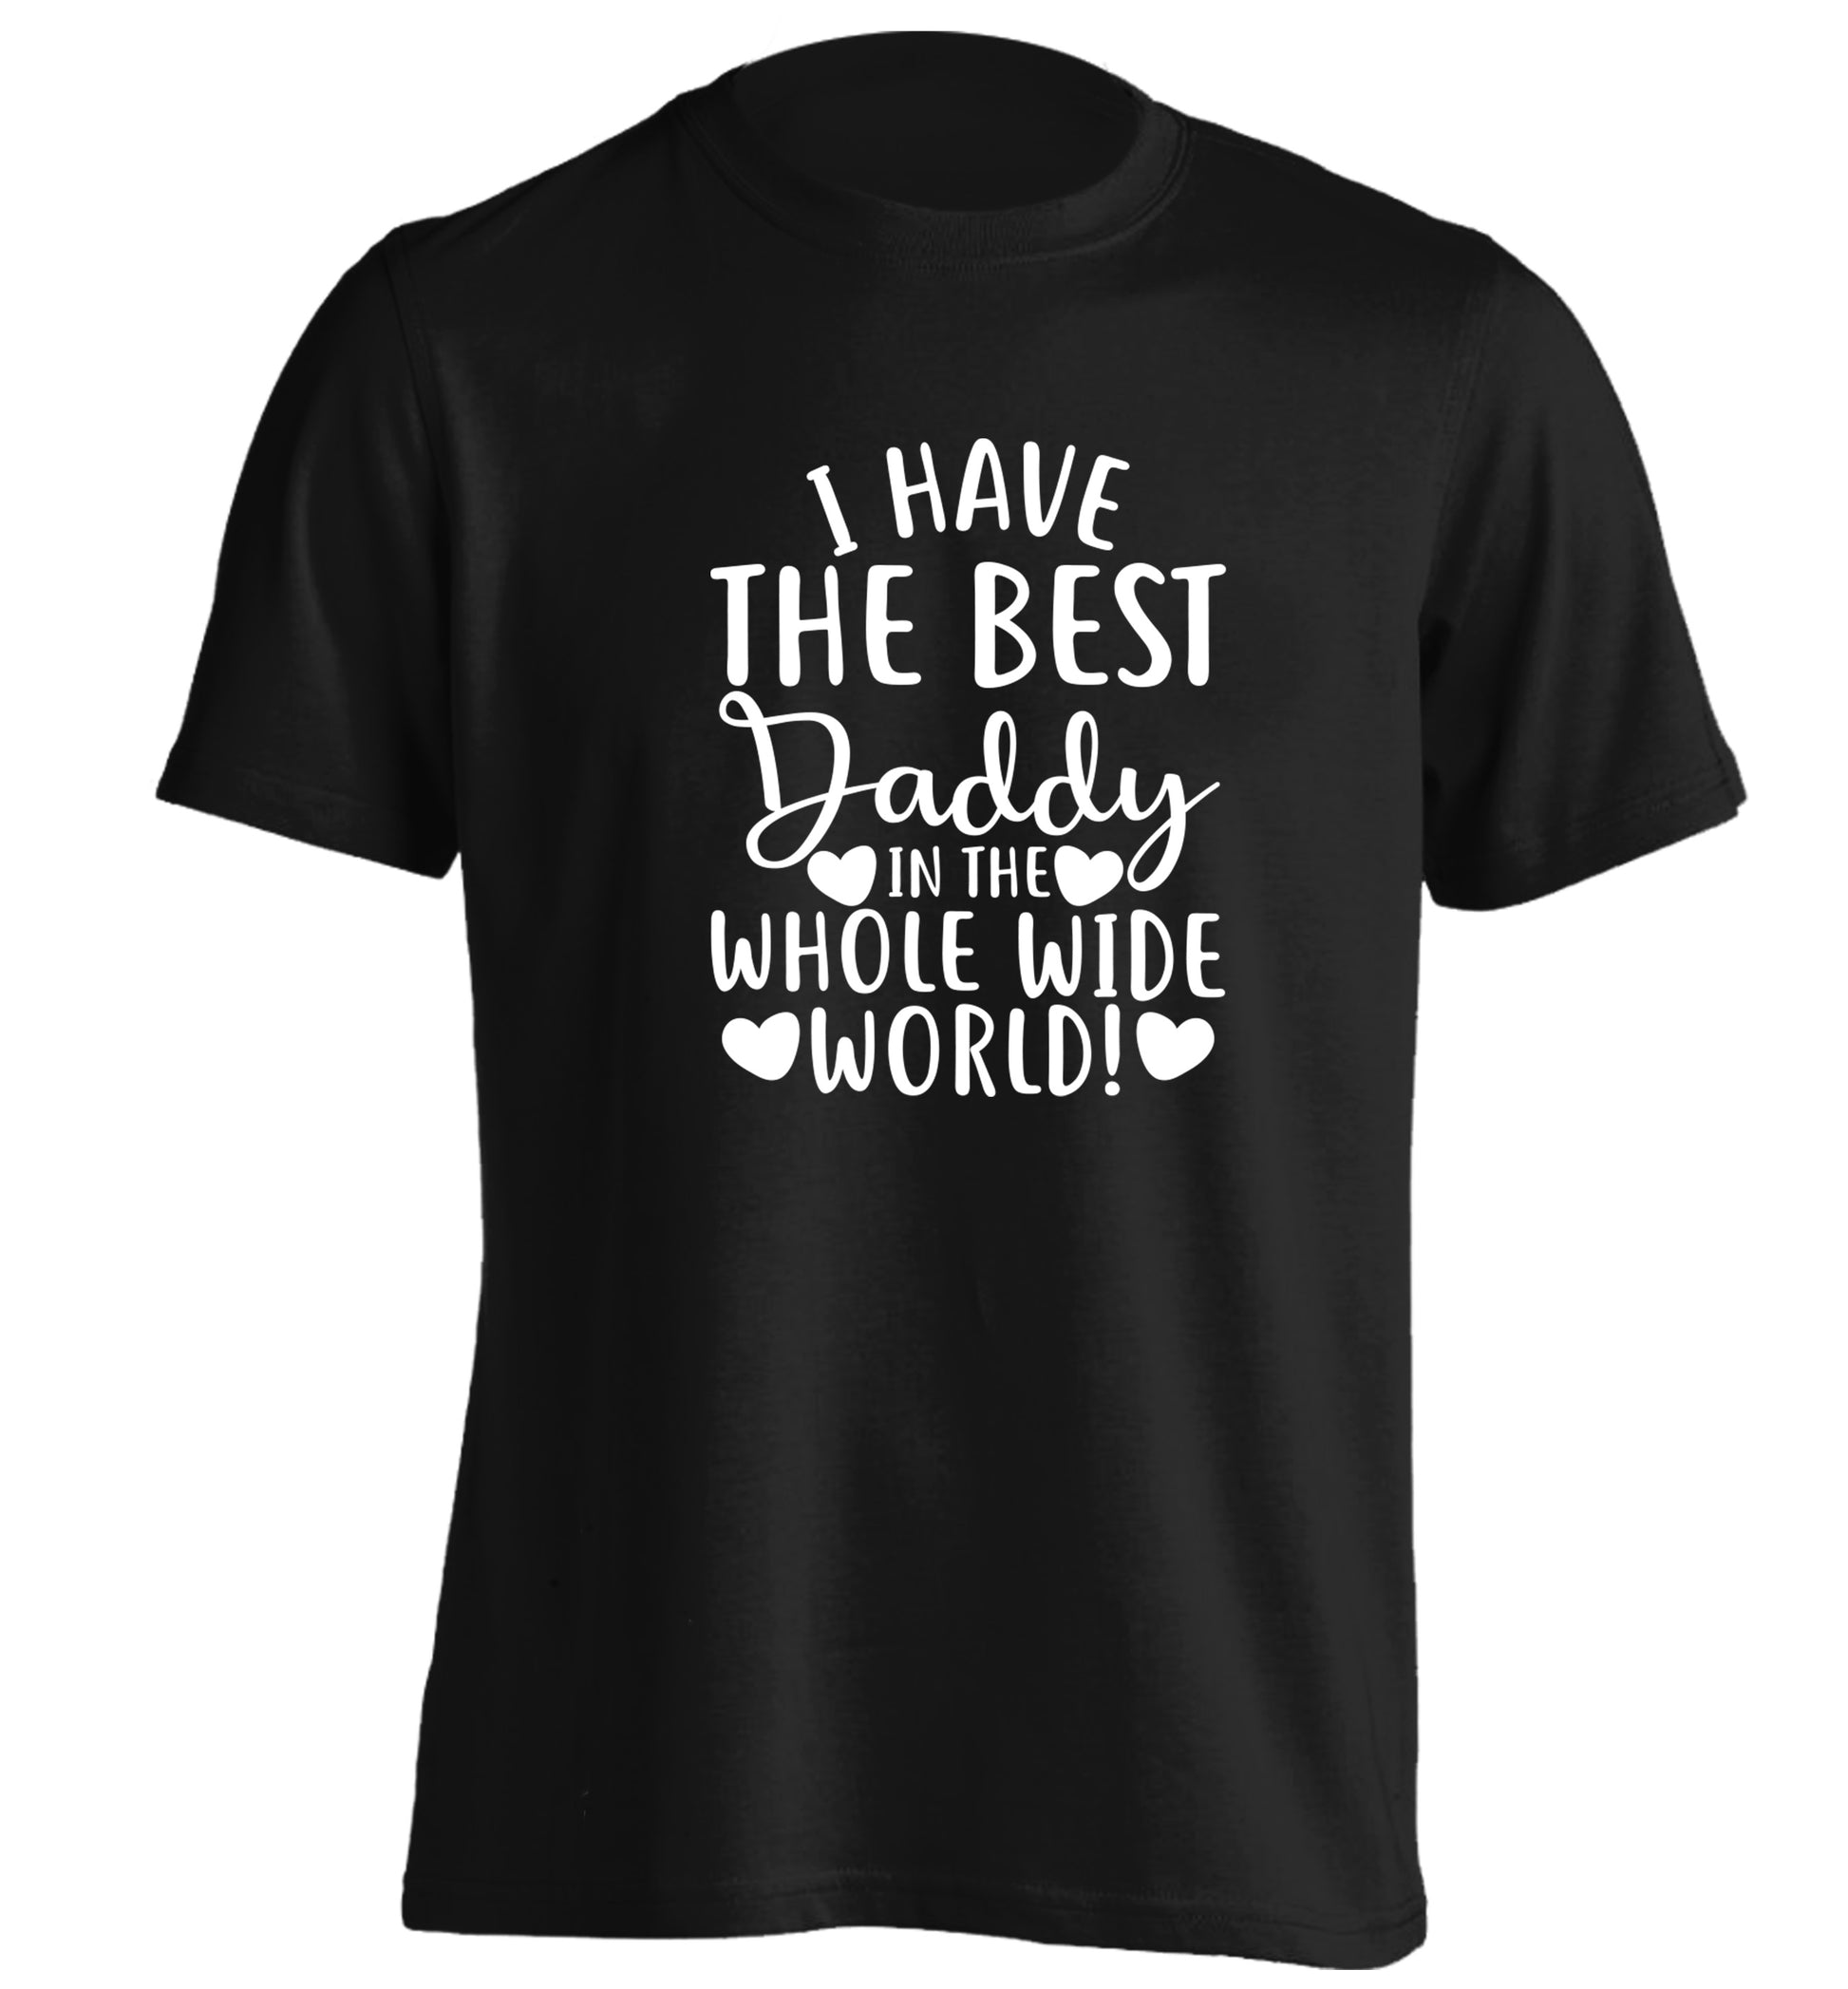 I have the best daddy in the whole wide world adults unisex black Tshirt 2XL